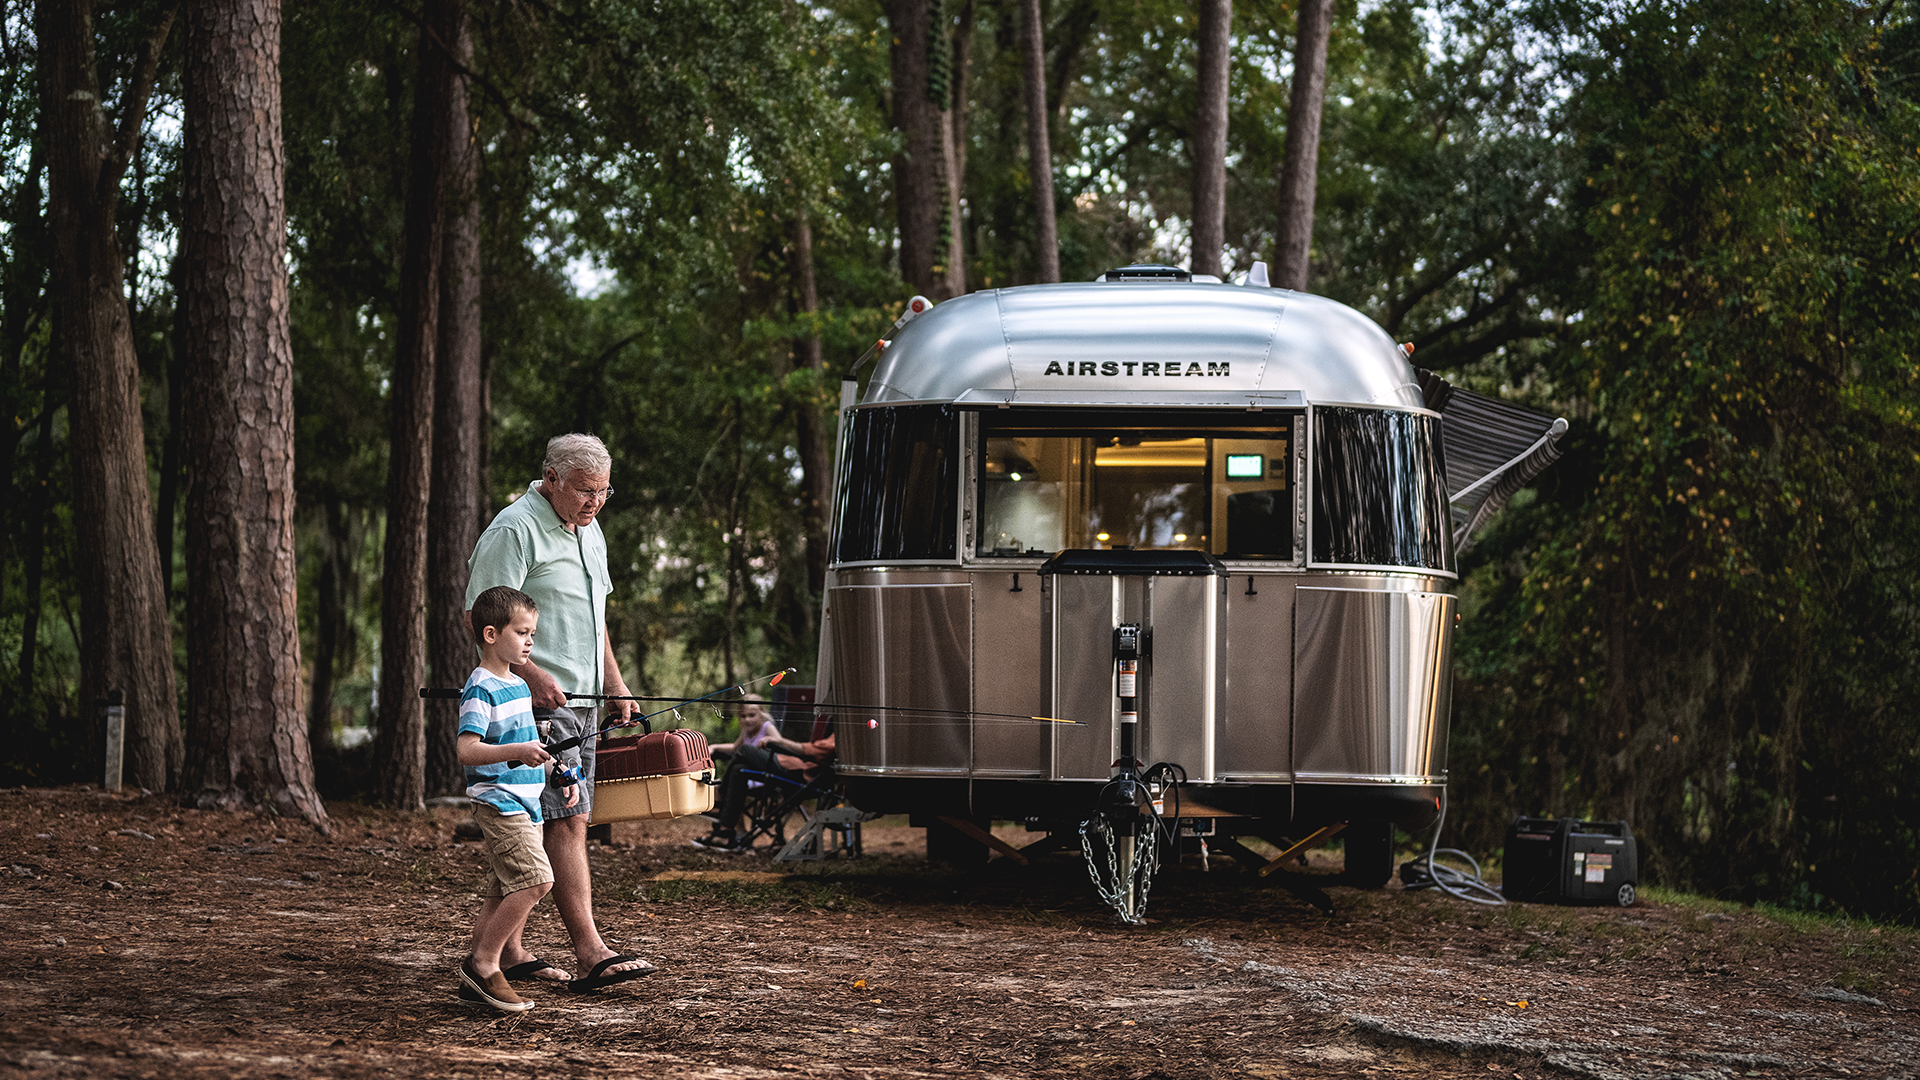 What-size-of-generator-is-needed-to-operate-my-Airstream.jpg